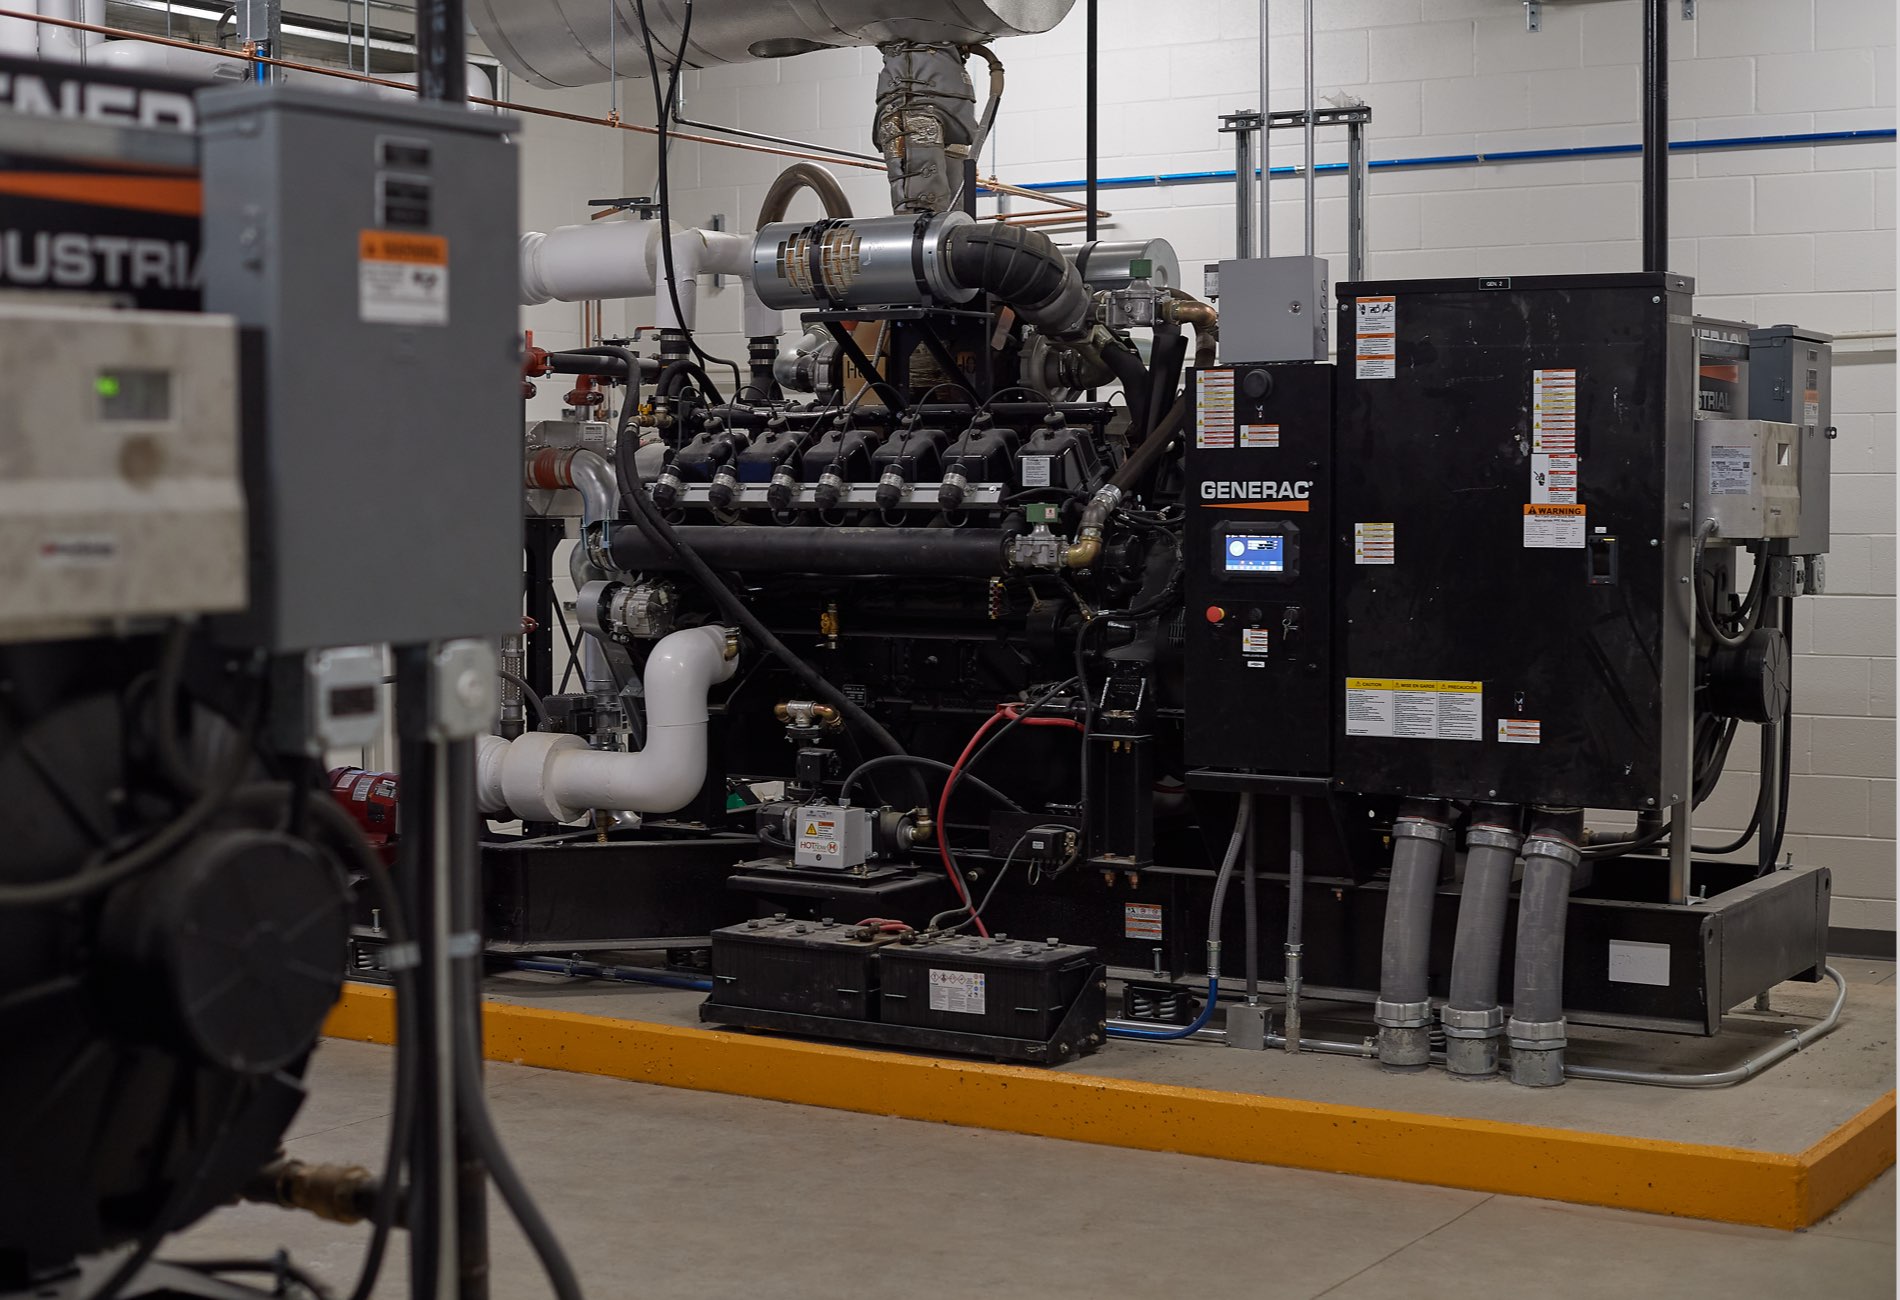 A piece of state-of-the-art equipment from Generac Industrial Power